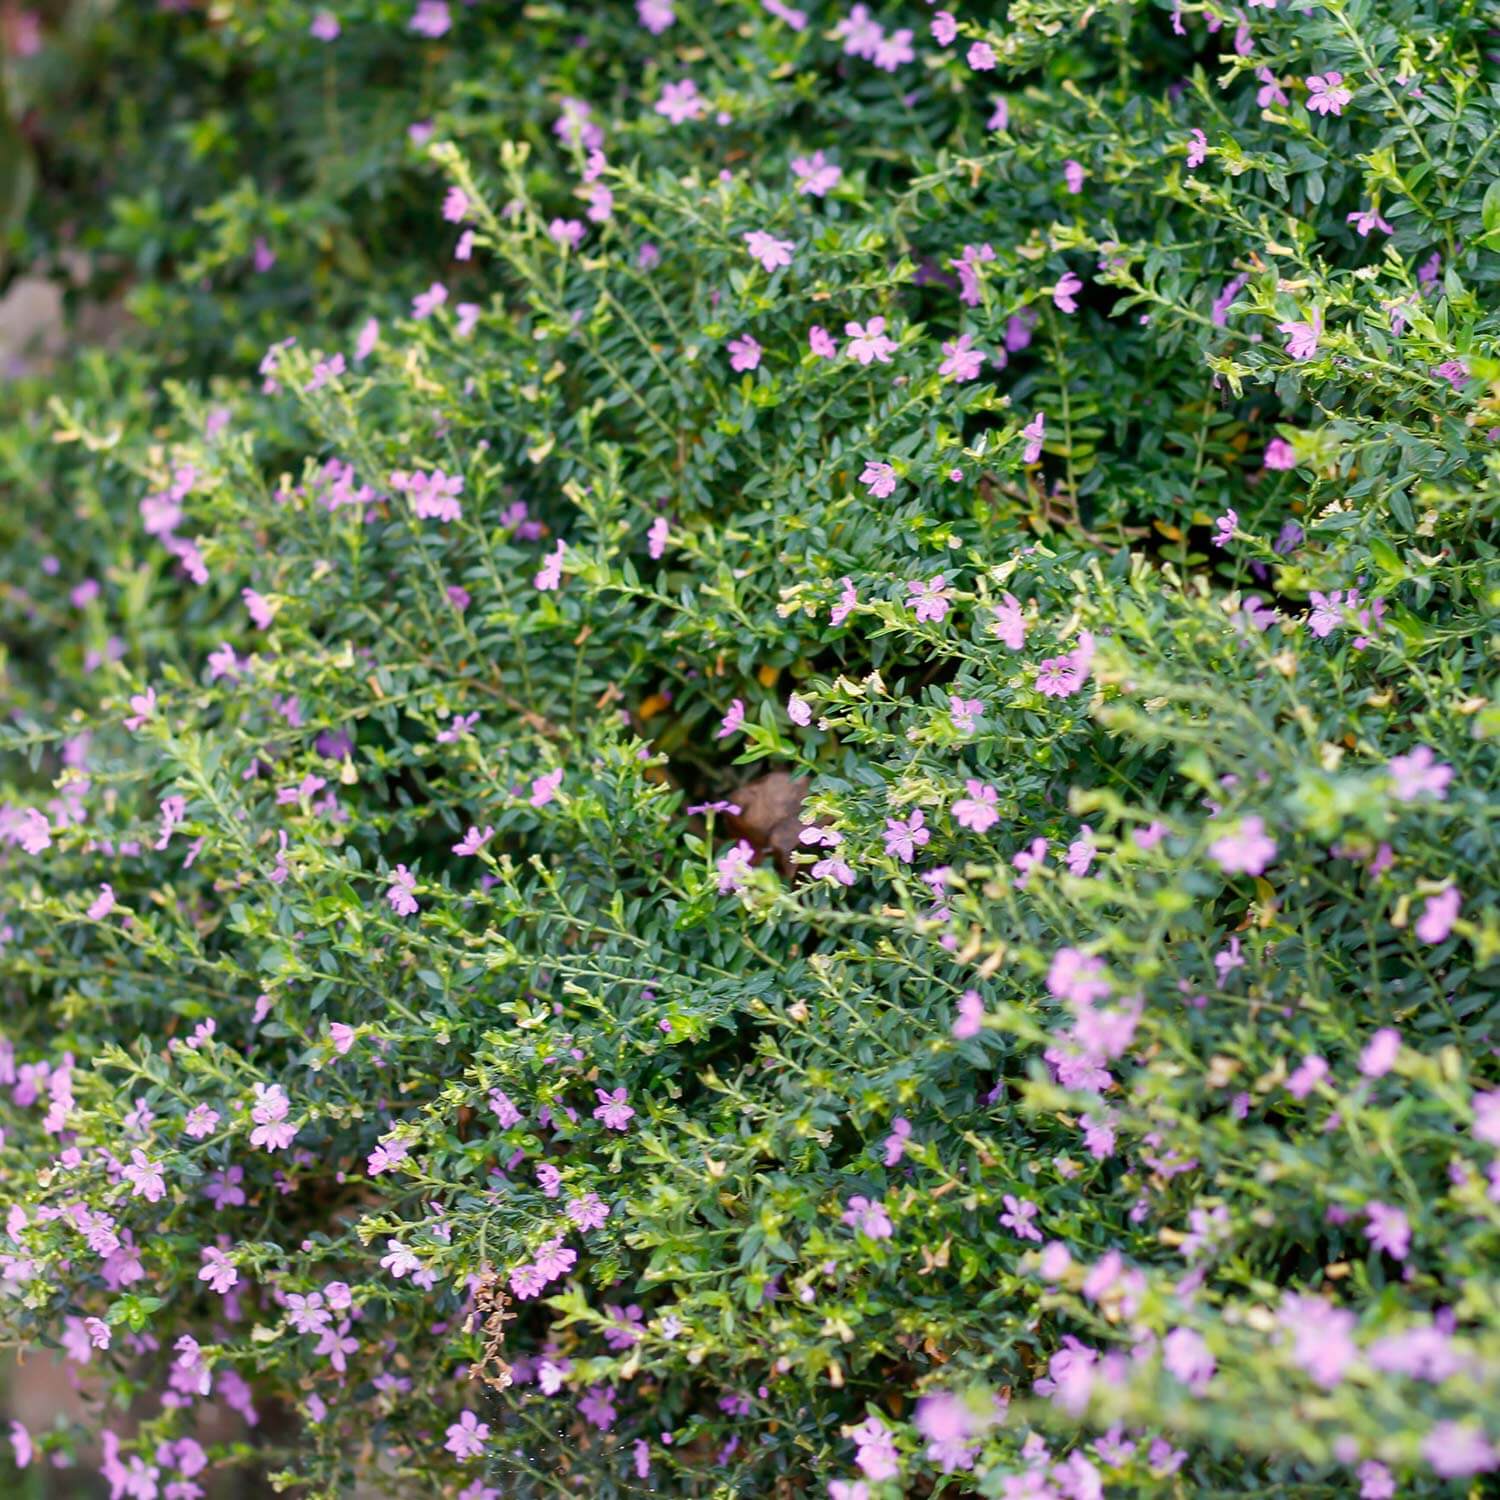 Multiple blooming purple flowers from a Cuphea hyssopifolia, Mexican Heather